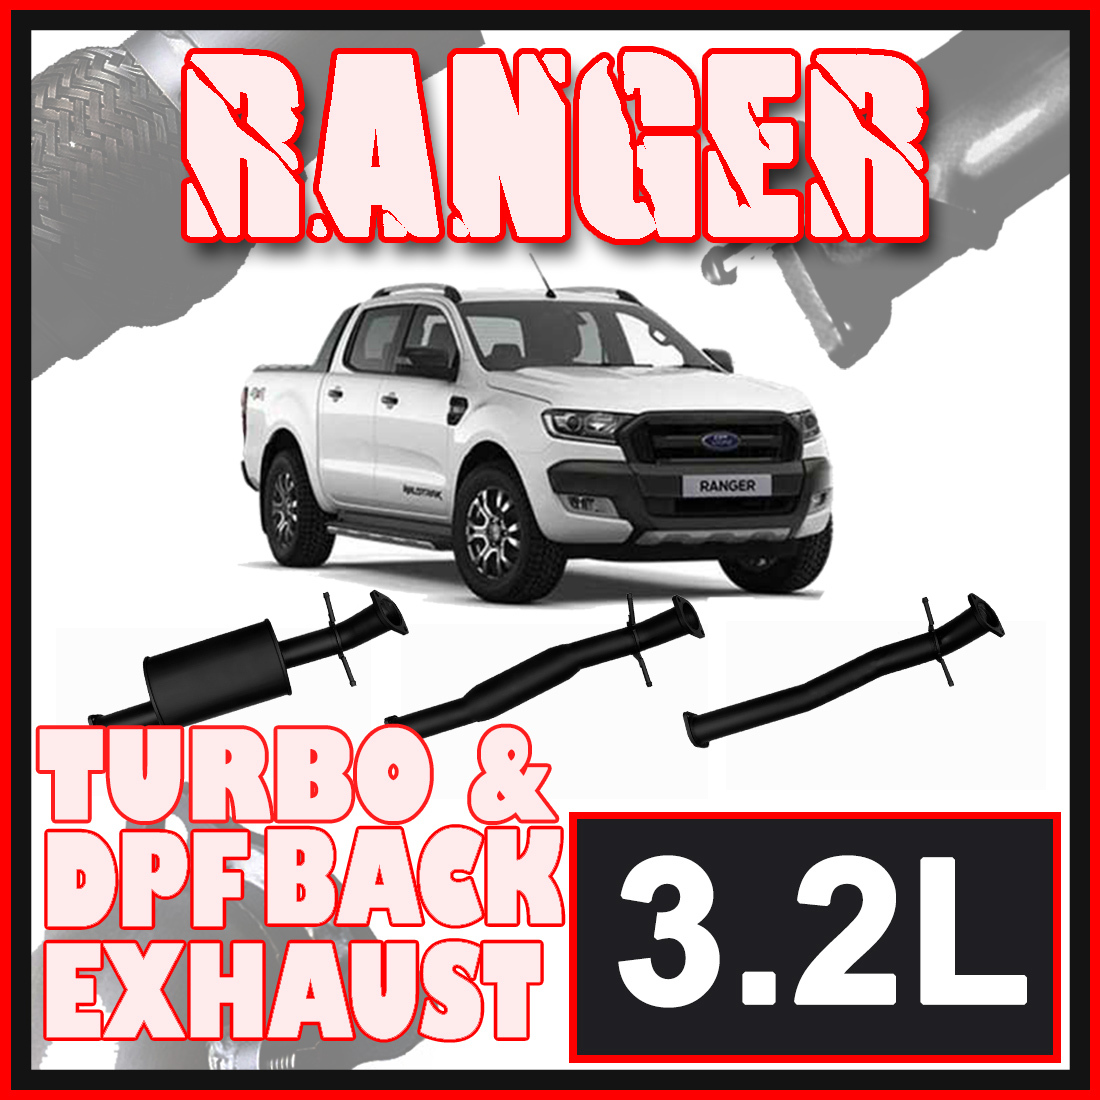 Ford Ranger Exhaust PX2/PX3 3.2L 3 Inch Systems image